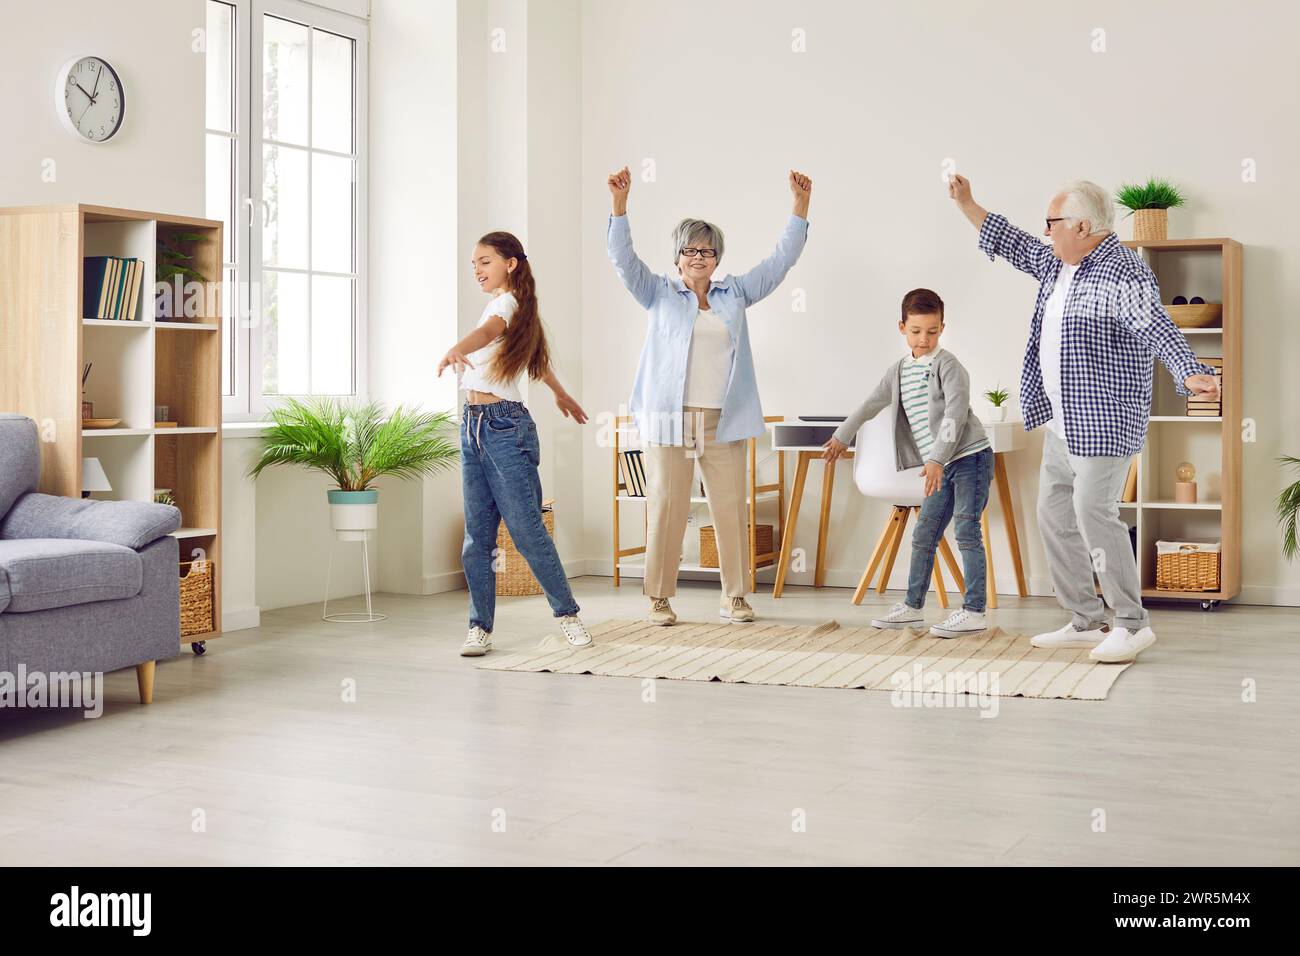 Happy grandparents and children playing, dancing and having fun together at home Stock Photo